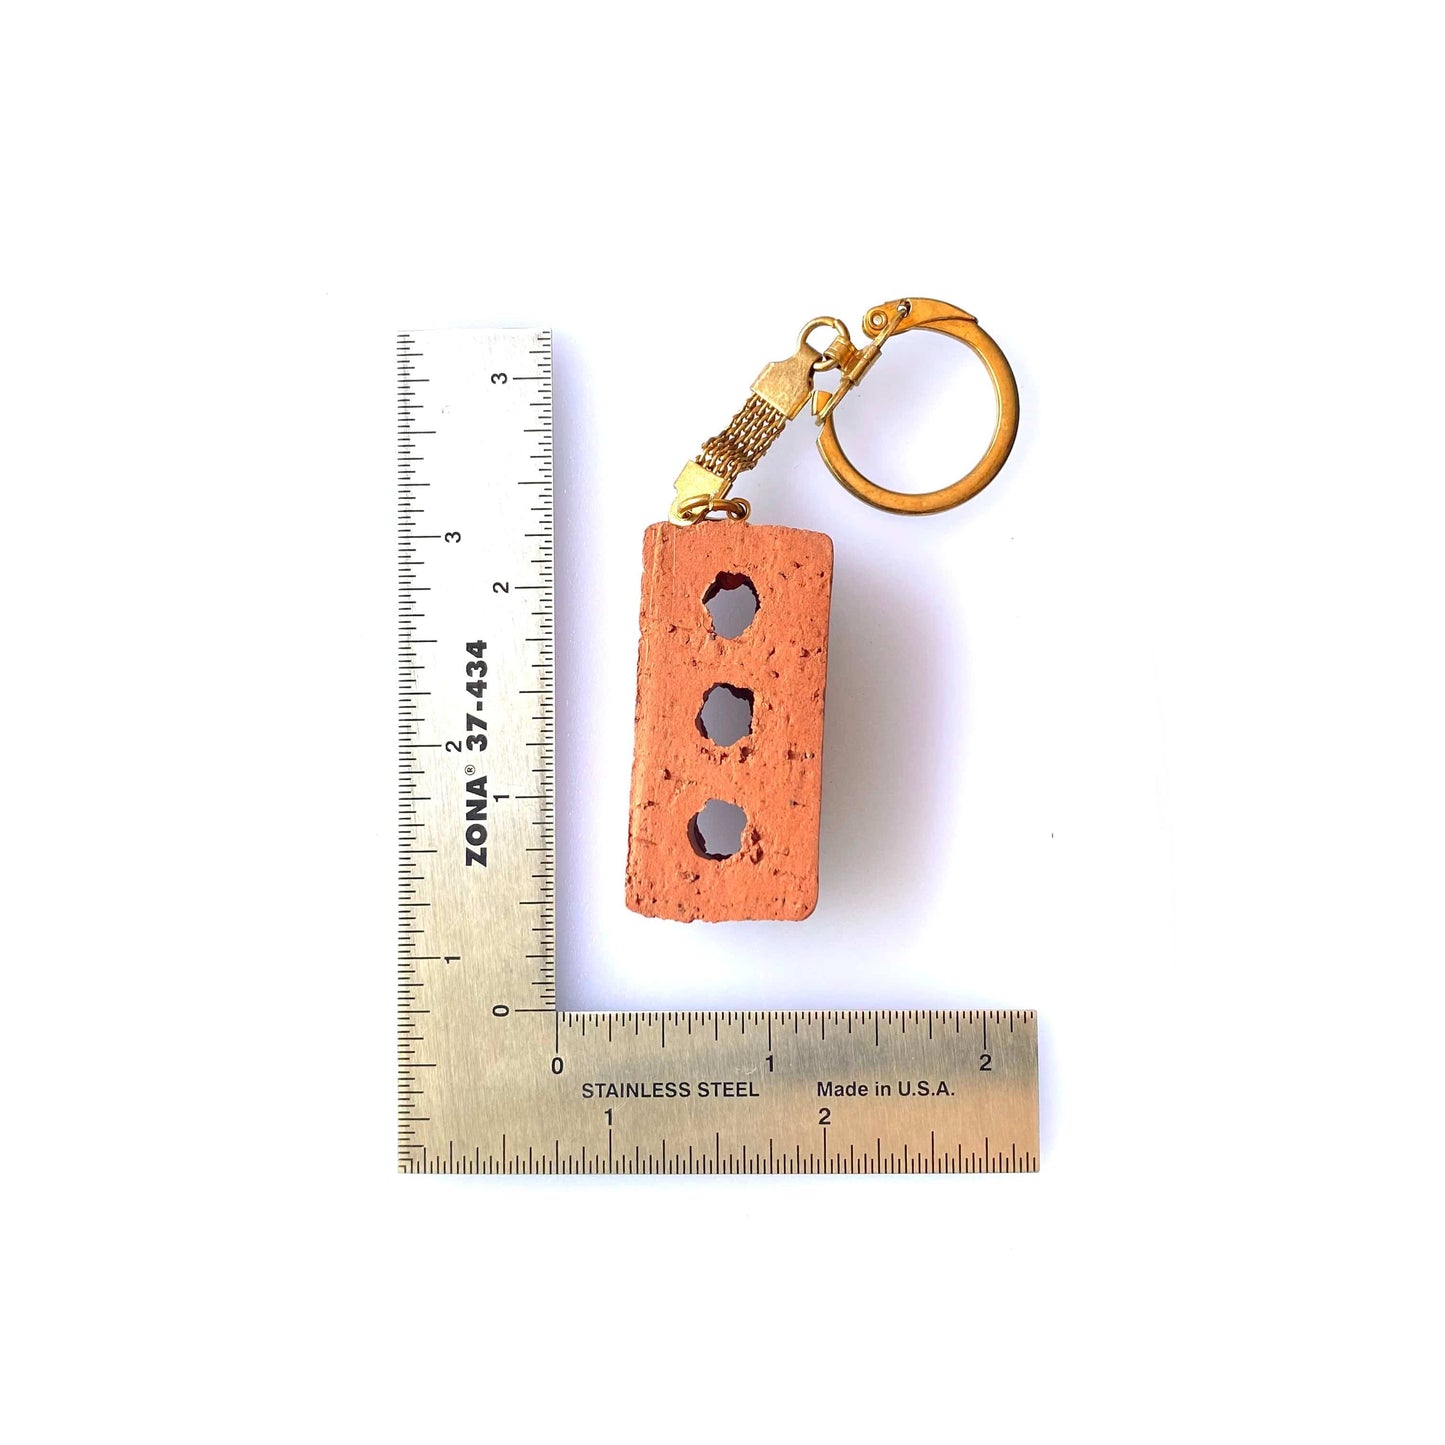 Vintage Endicott Clay Products Employee-Only Keychain Goldtone Key Ring